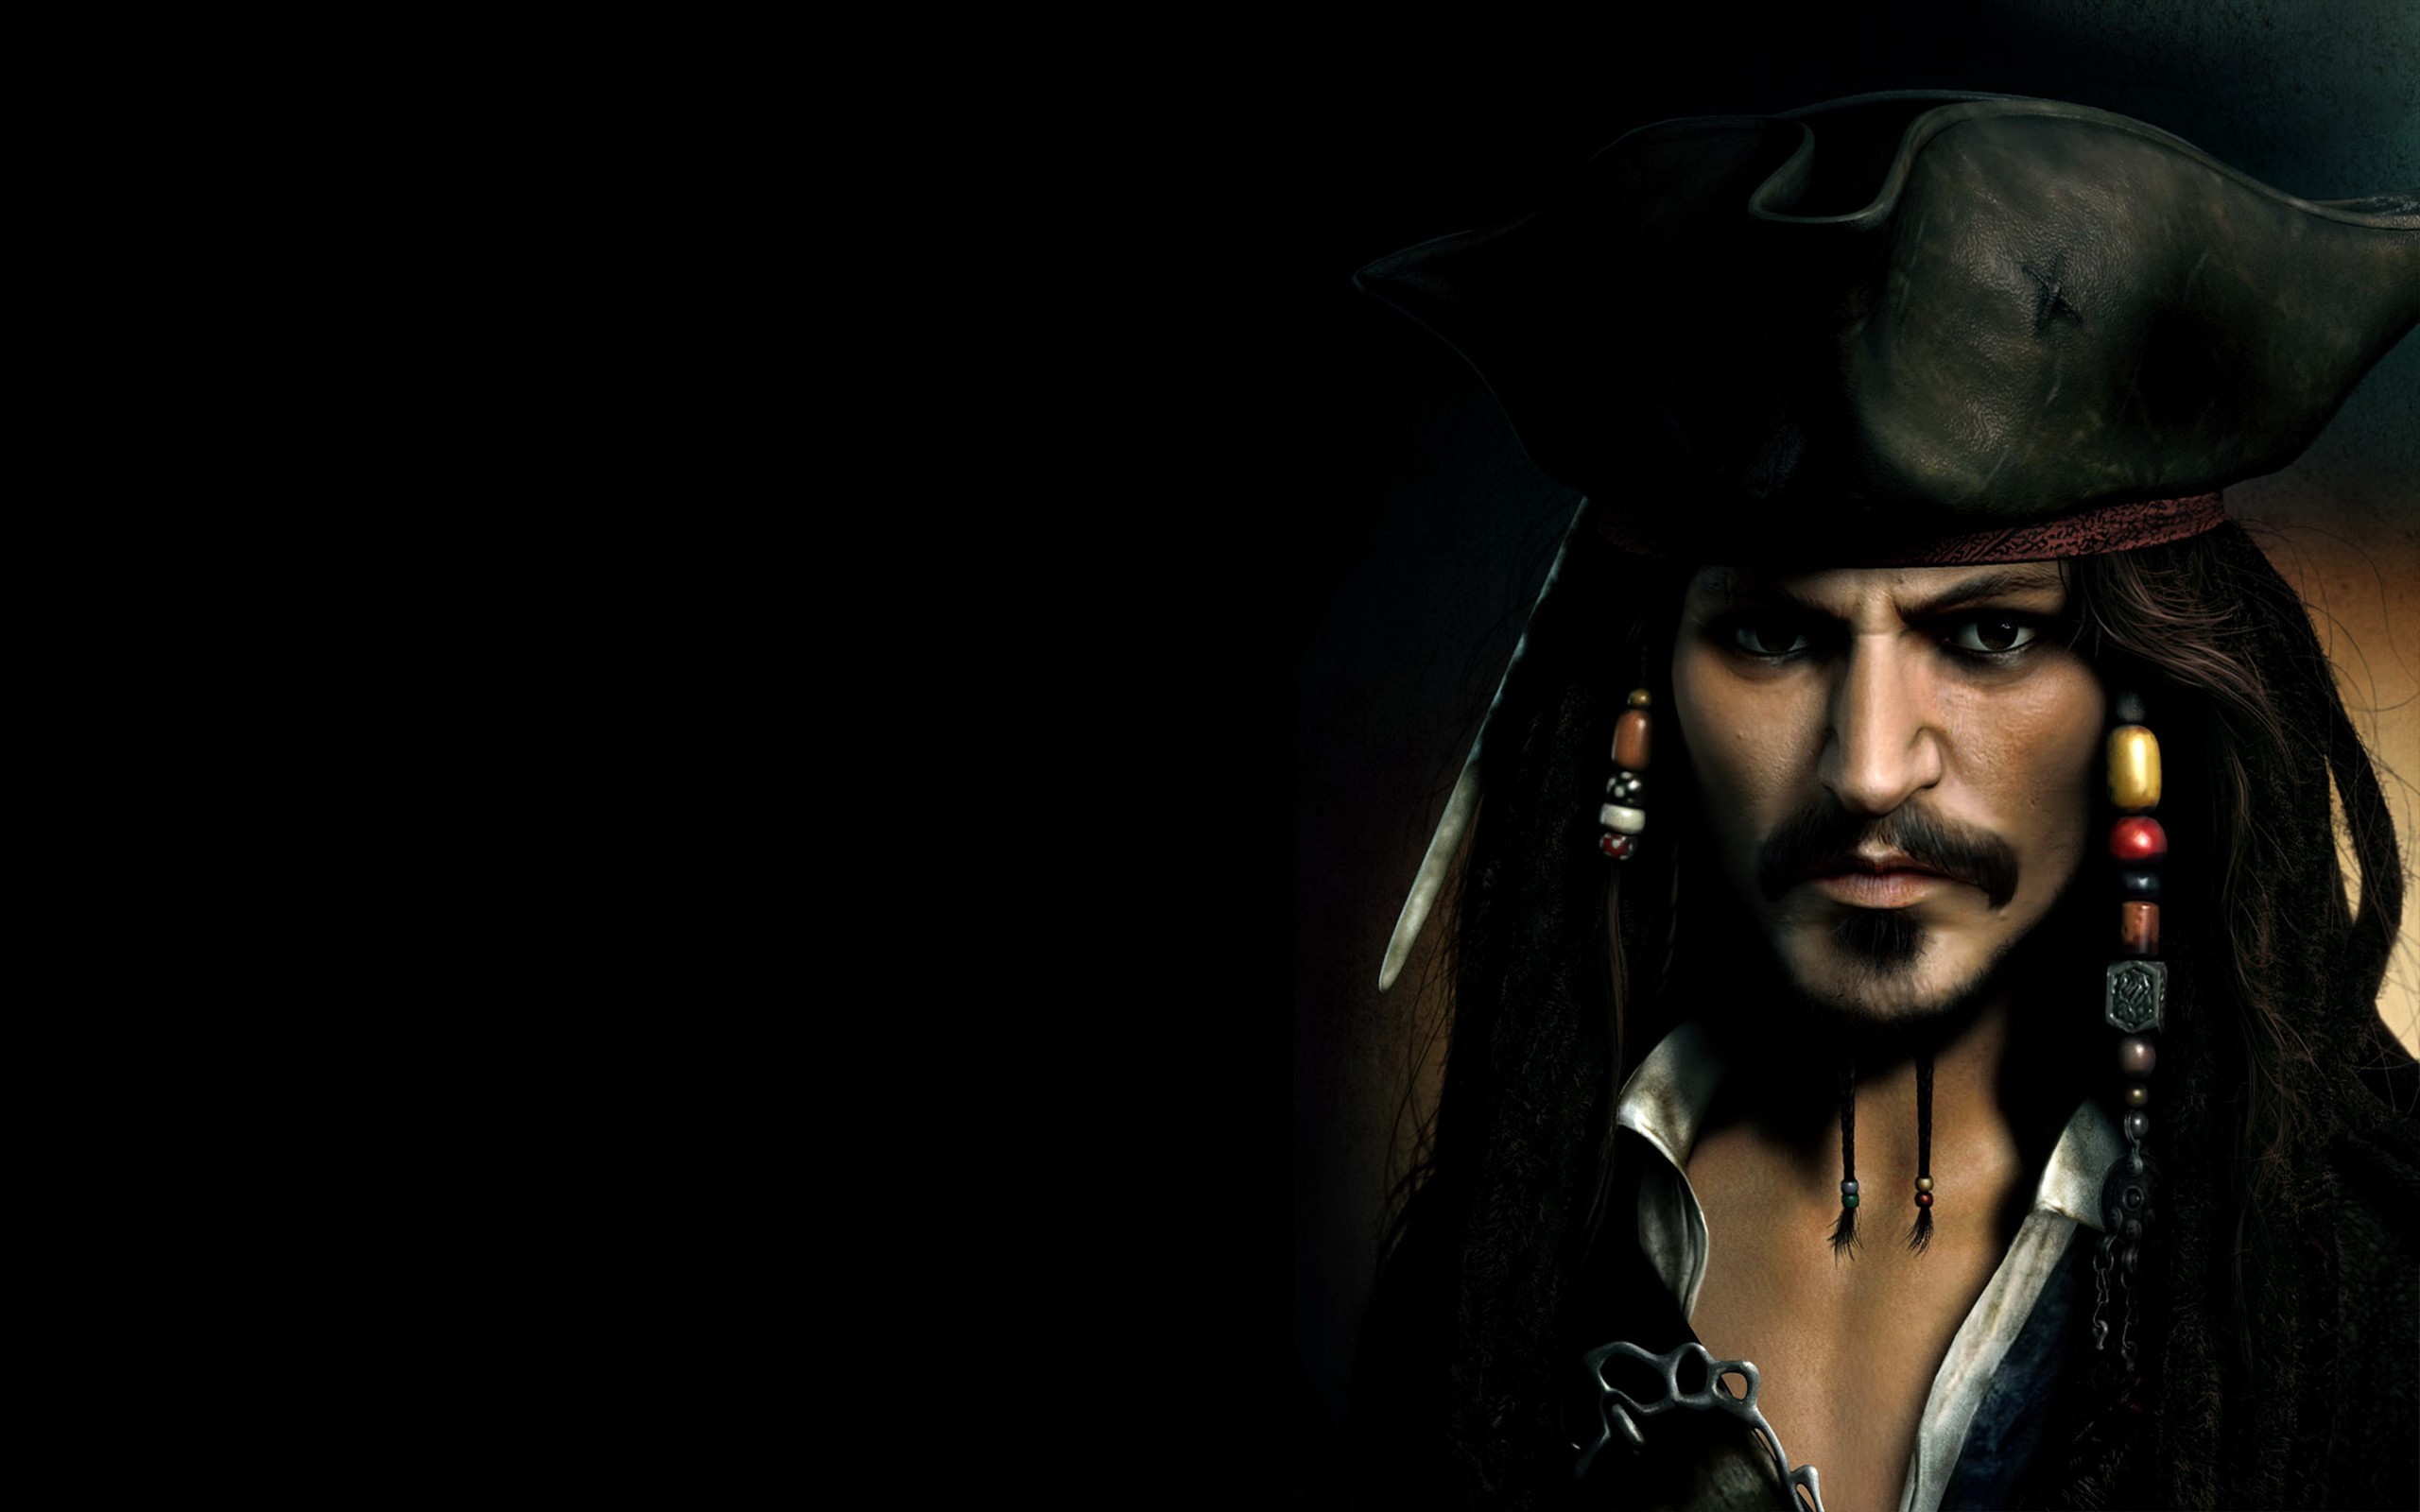 General 2560x1600 Johnny Depp Pirates of the Caribbean Jack Sparrow movies men pirates simple background